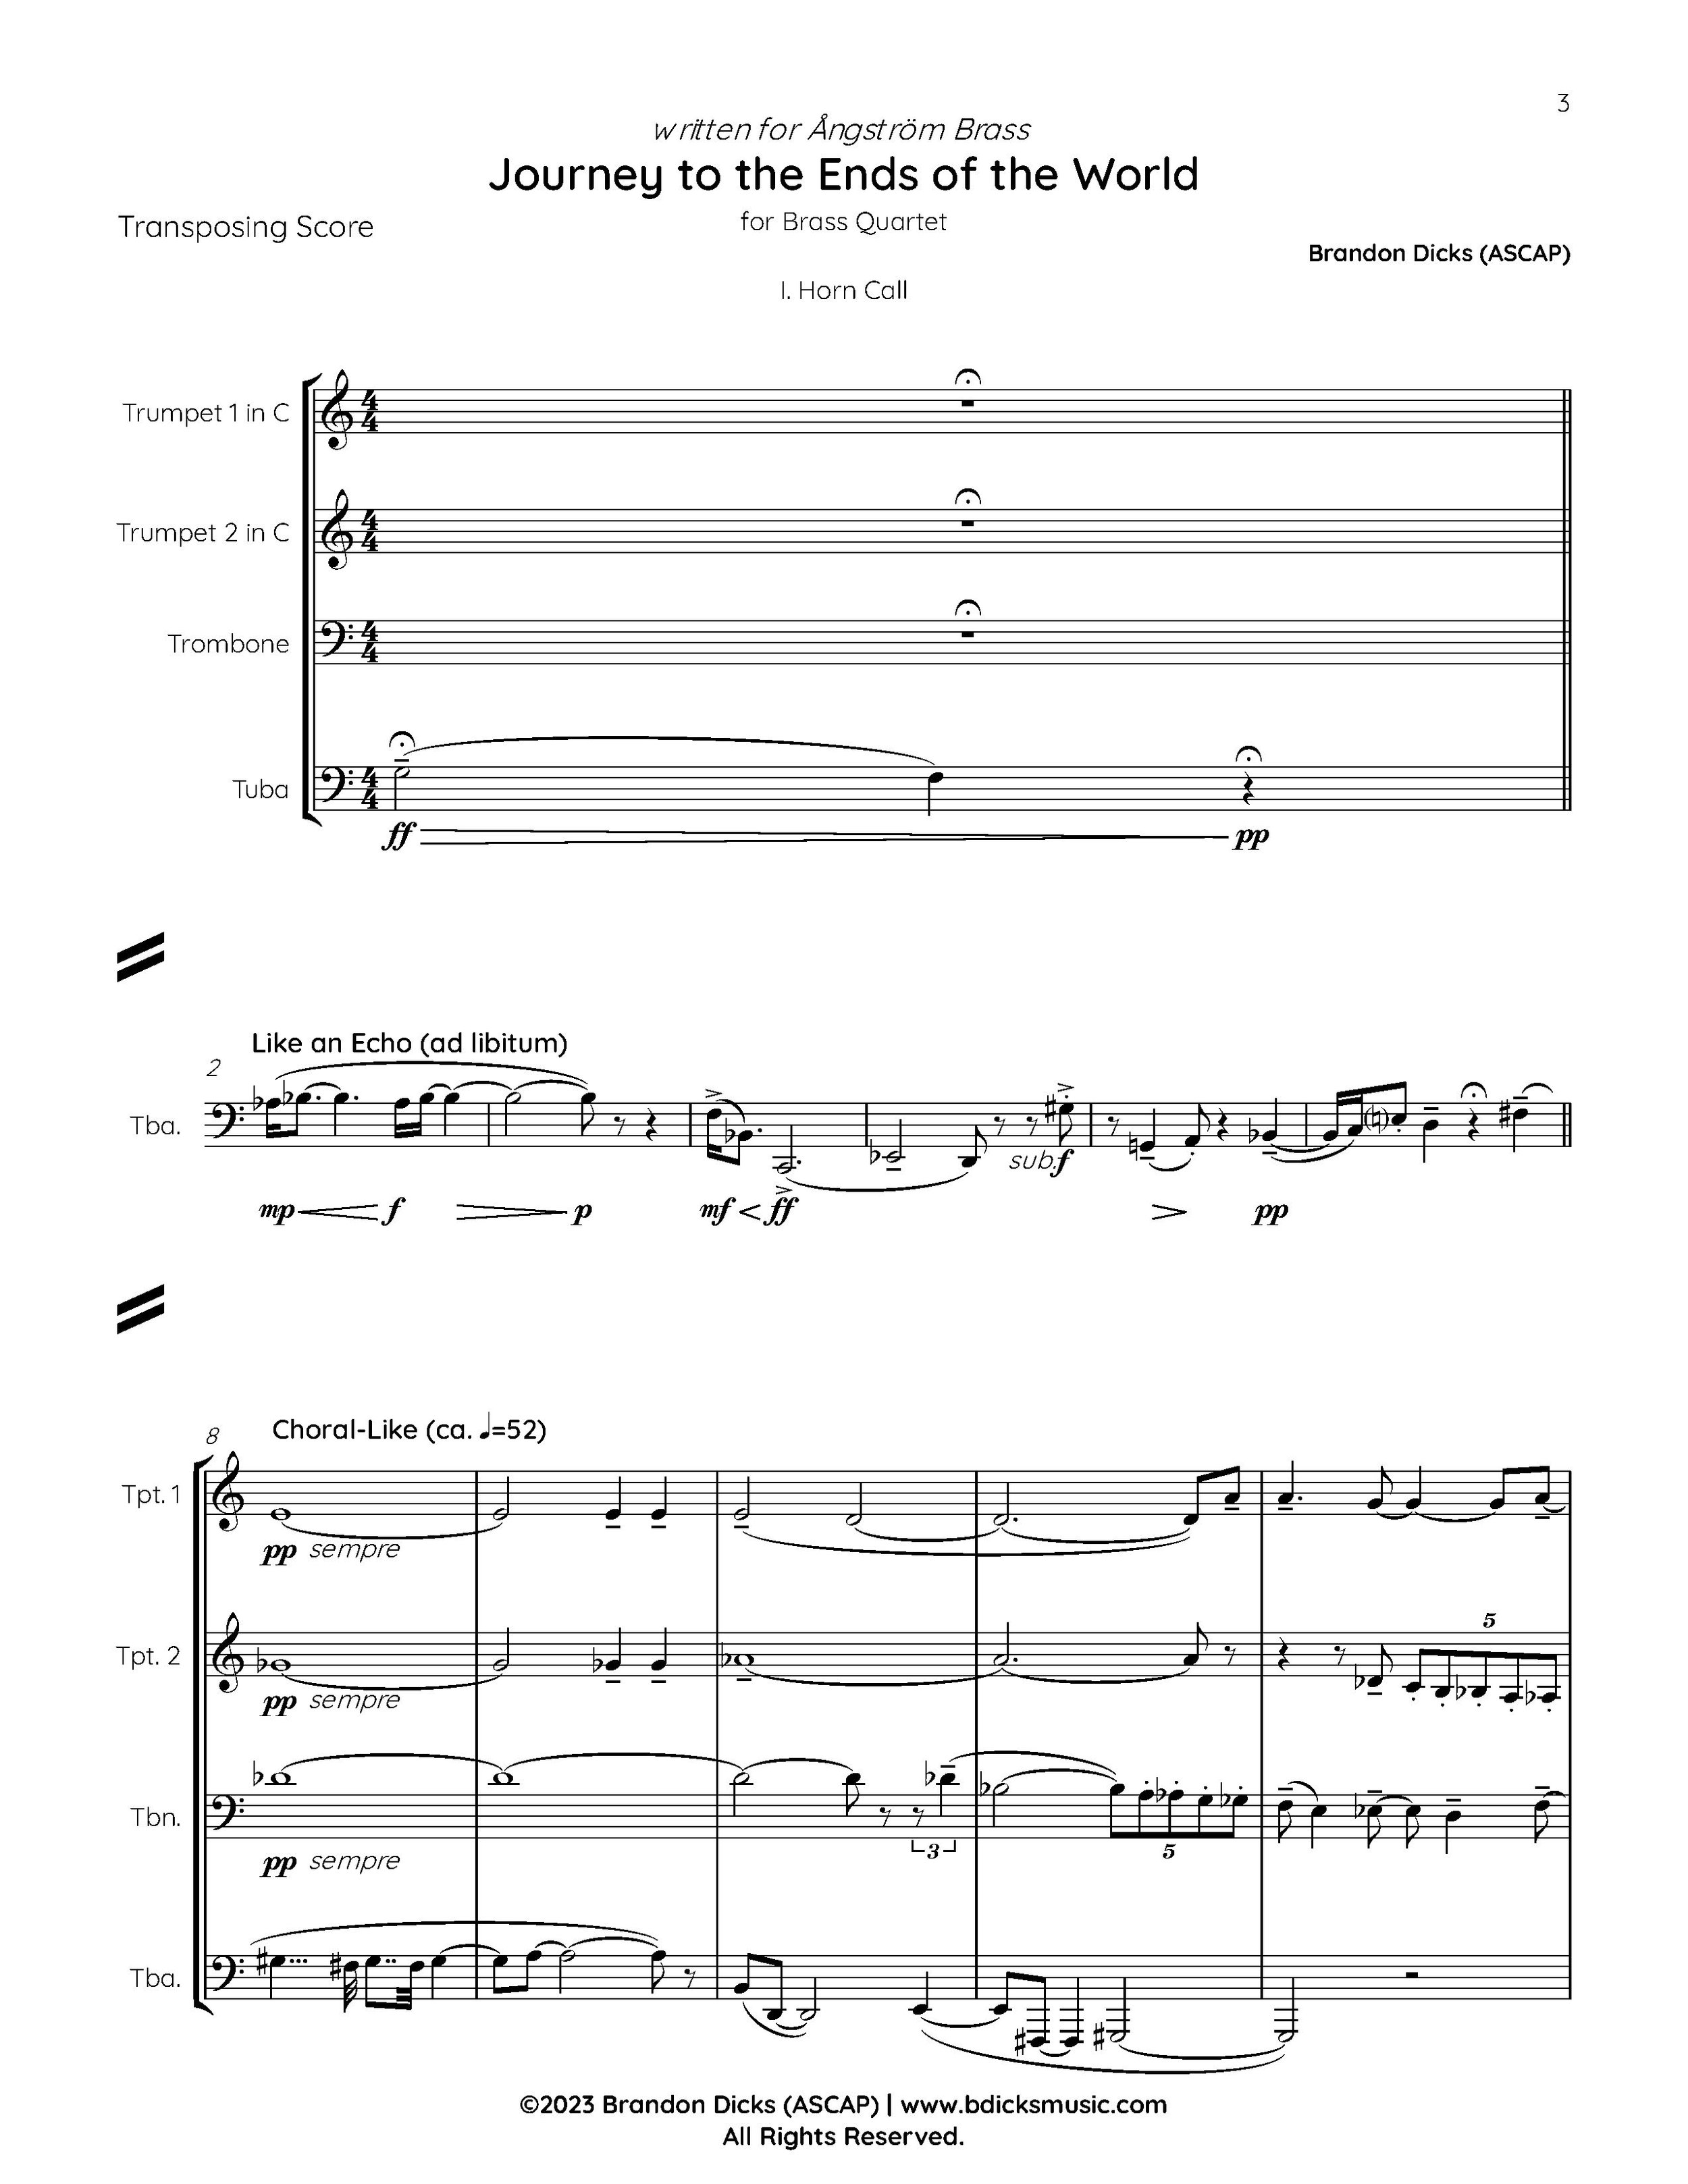 v1.2 Journey to the Ends of the World I. Horn Call - Transposing Score_Page_03.jpg